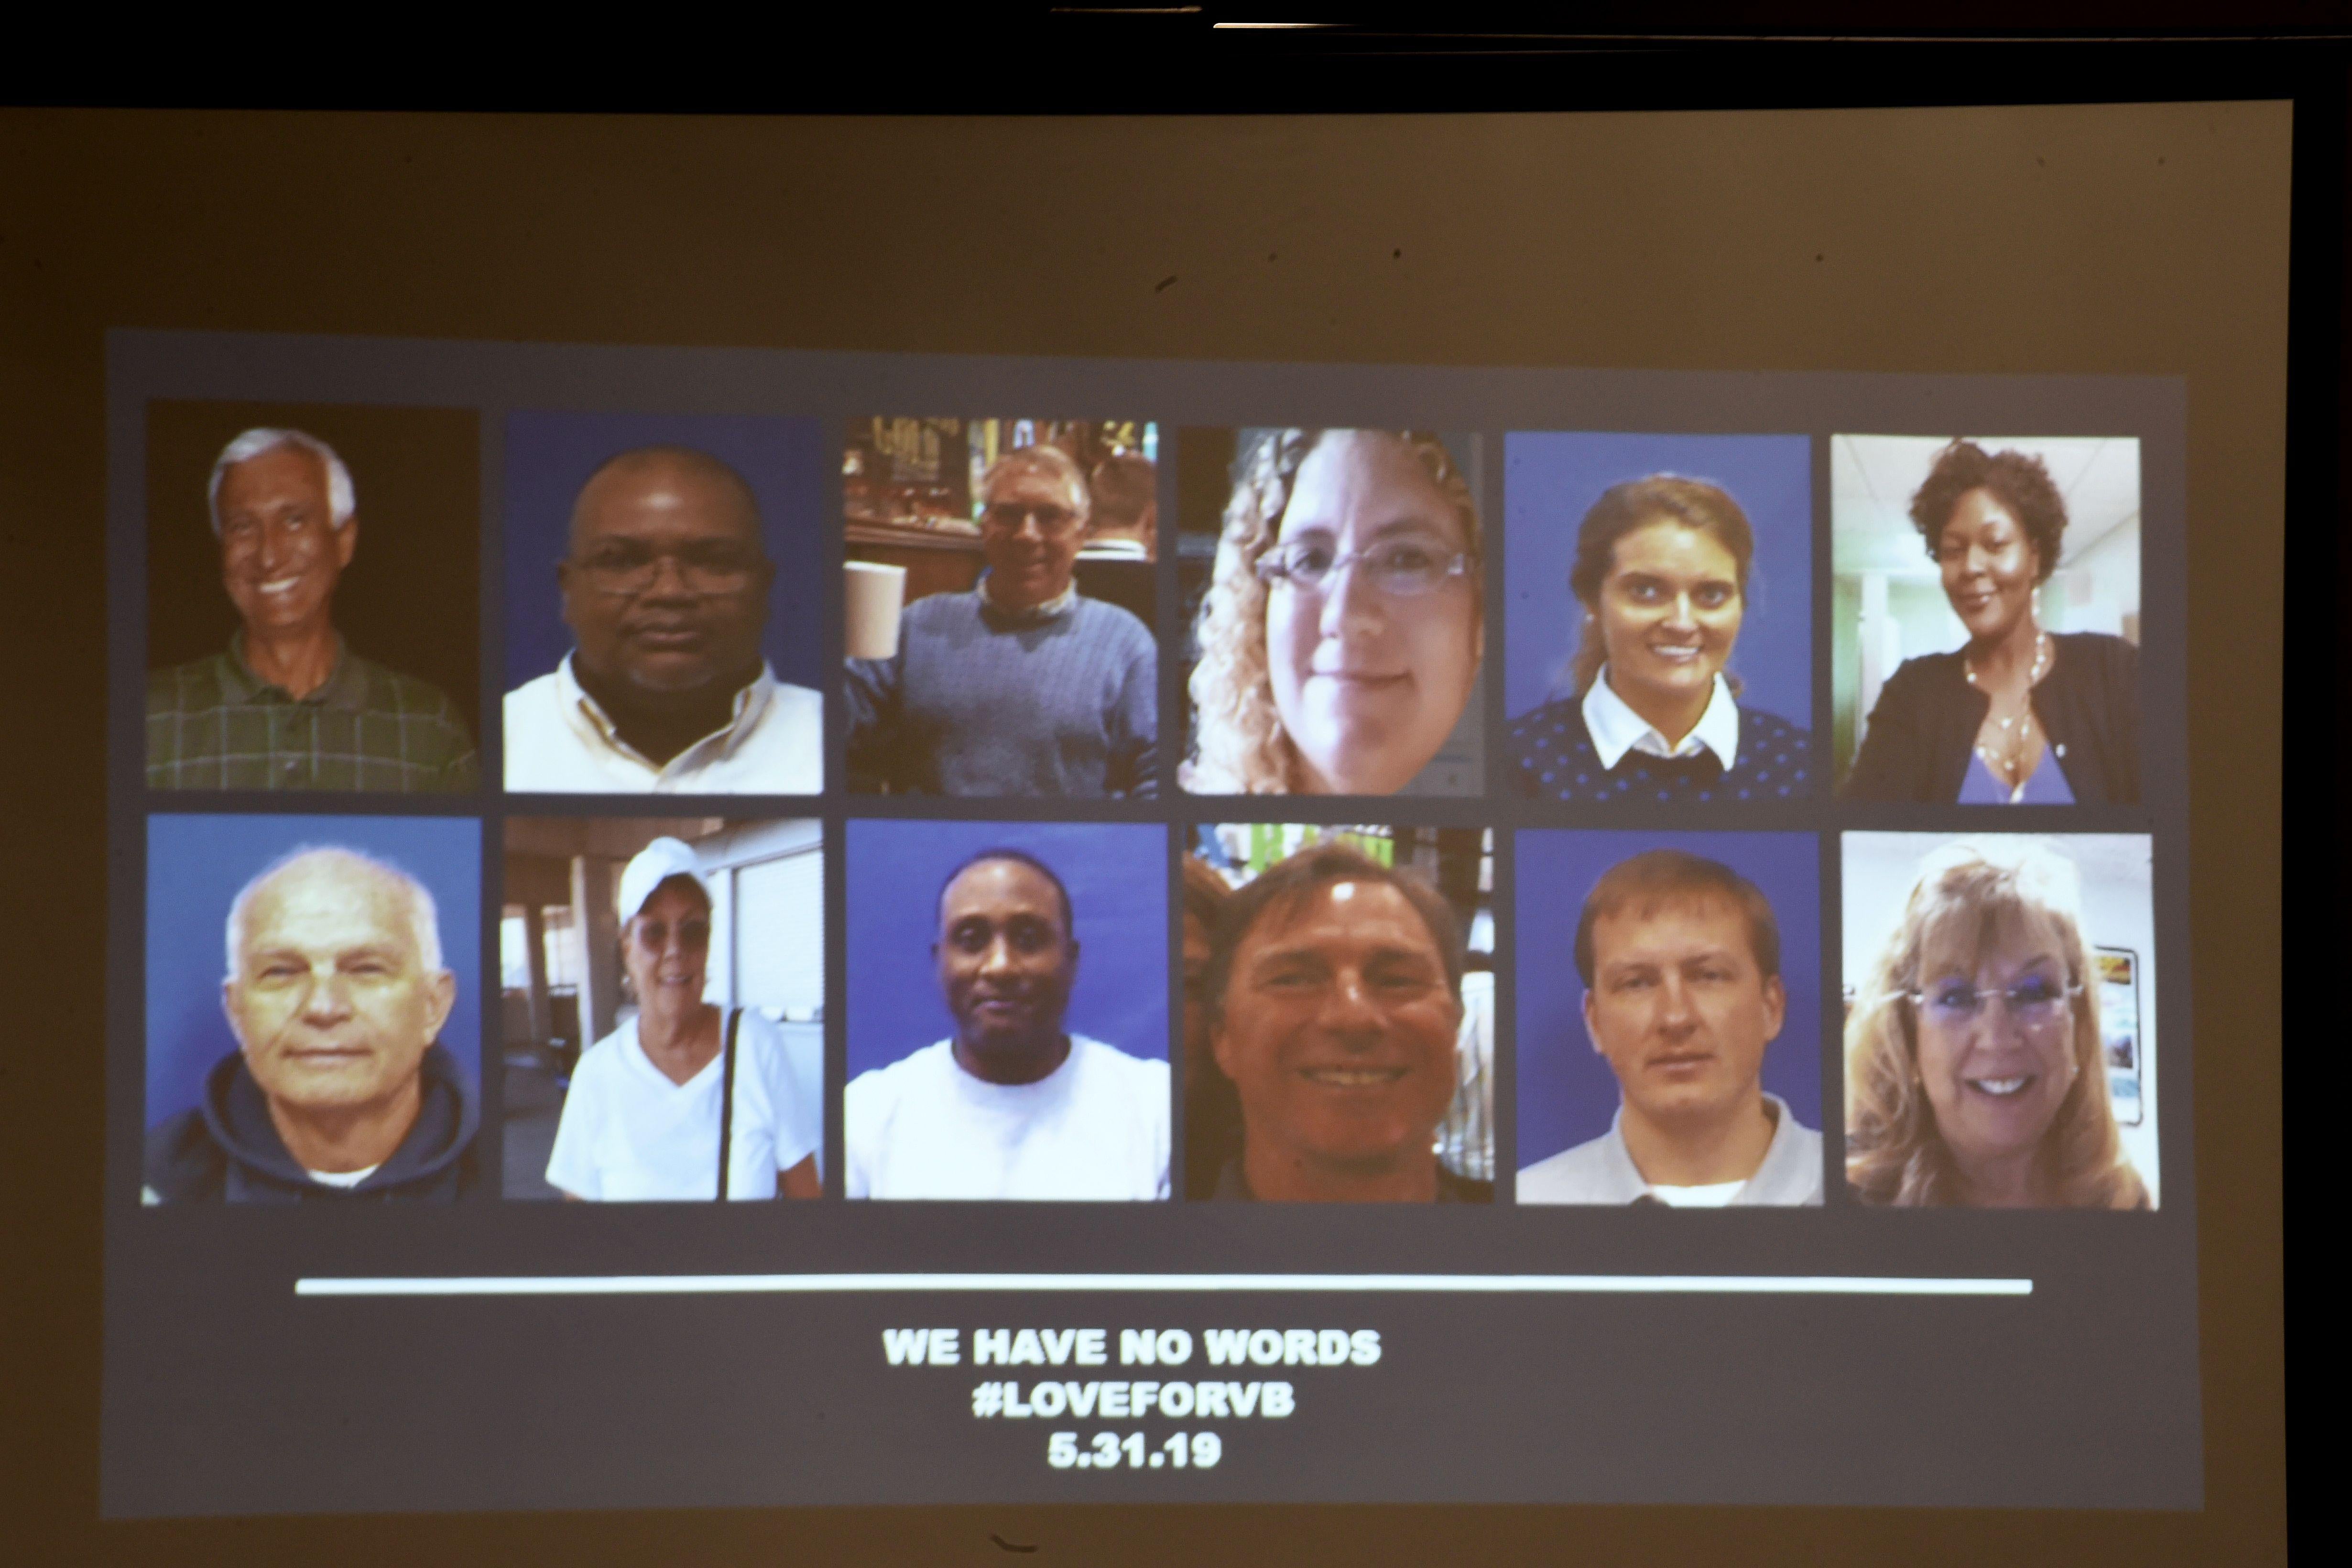 A slide of the victims in the May 31, 2019 mass shooting at a Virginia, Beach, Virginia, municipal building is shown during a press conference on June 1, 2019.